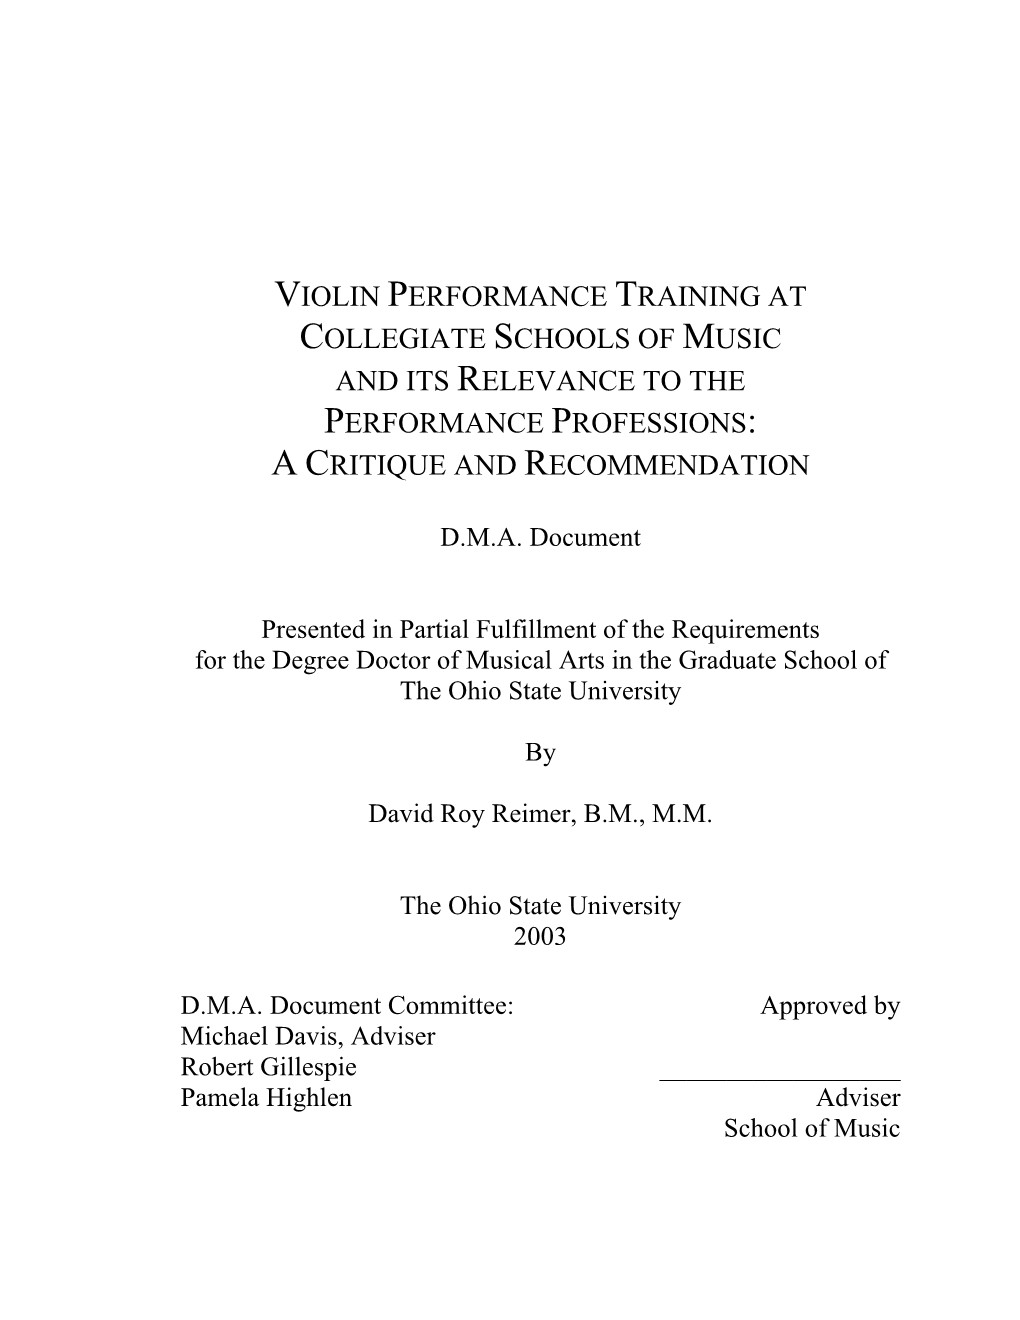 Violin Performance Training at Collegiate Schools of Music and Its Relevance to the Performance Professions: a Critique and Recommendation